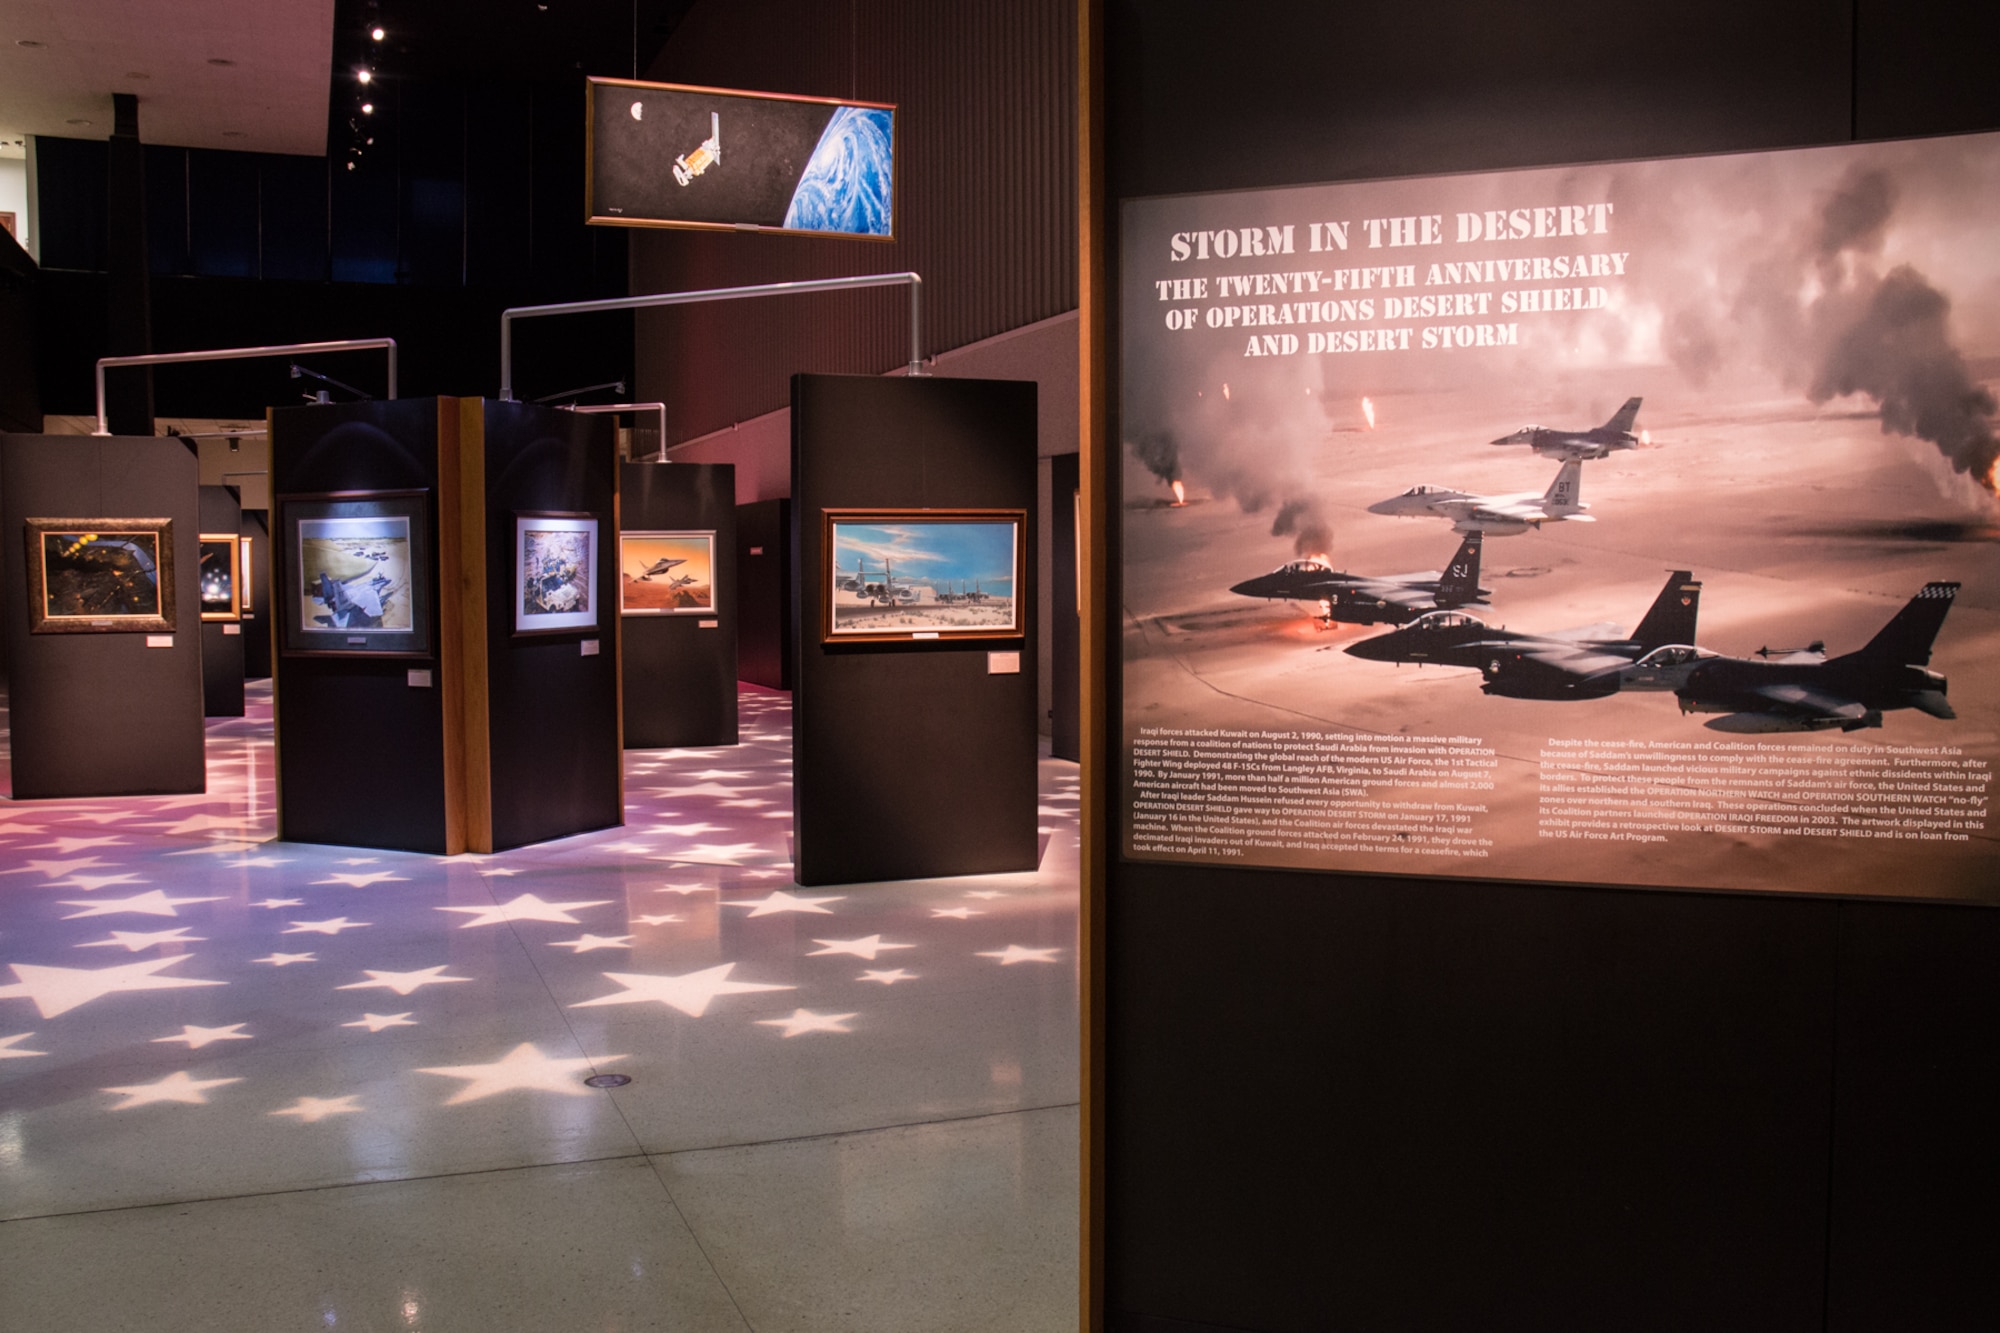 An art exhibit commemorating the 25th anniversary of Operations Desert Shield and Desert Storm will be open through Labor Day 2016 at the National Museum of the U.S. Air Force. (U.S. Air Force photo)